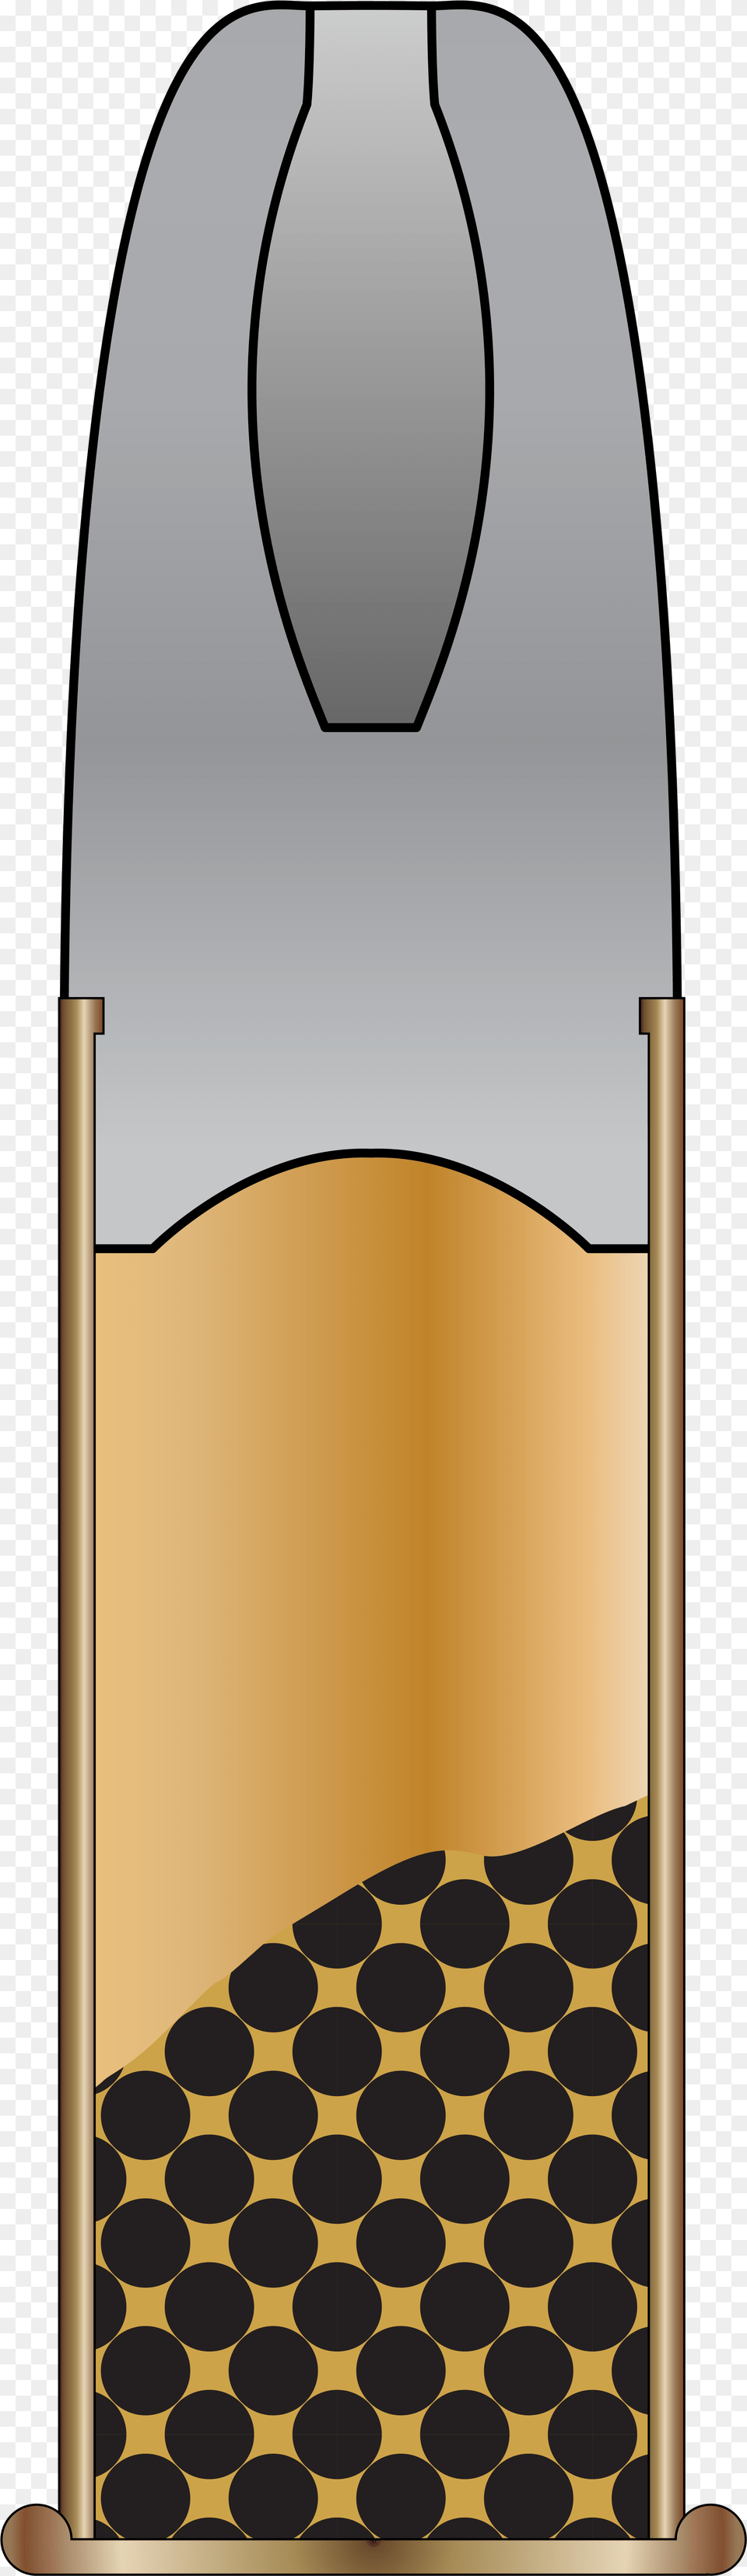 Hollow Point Cross Section Free Transparent Png